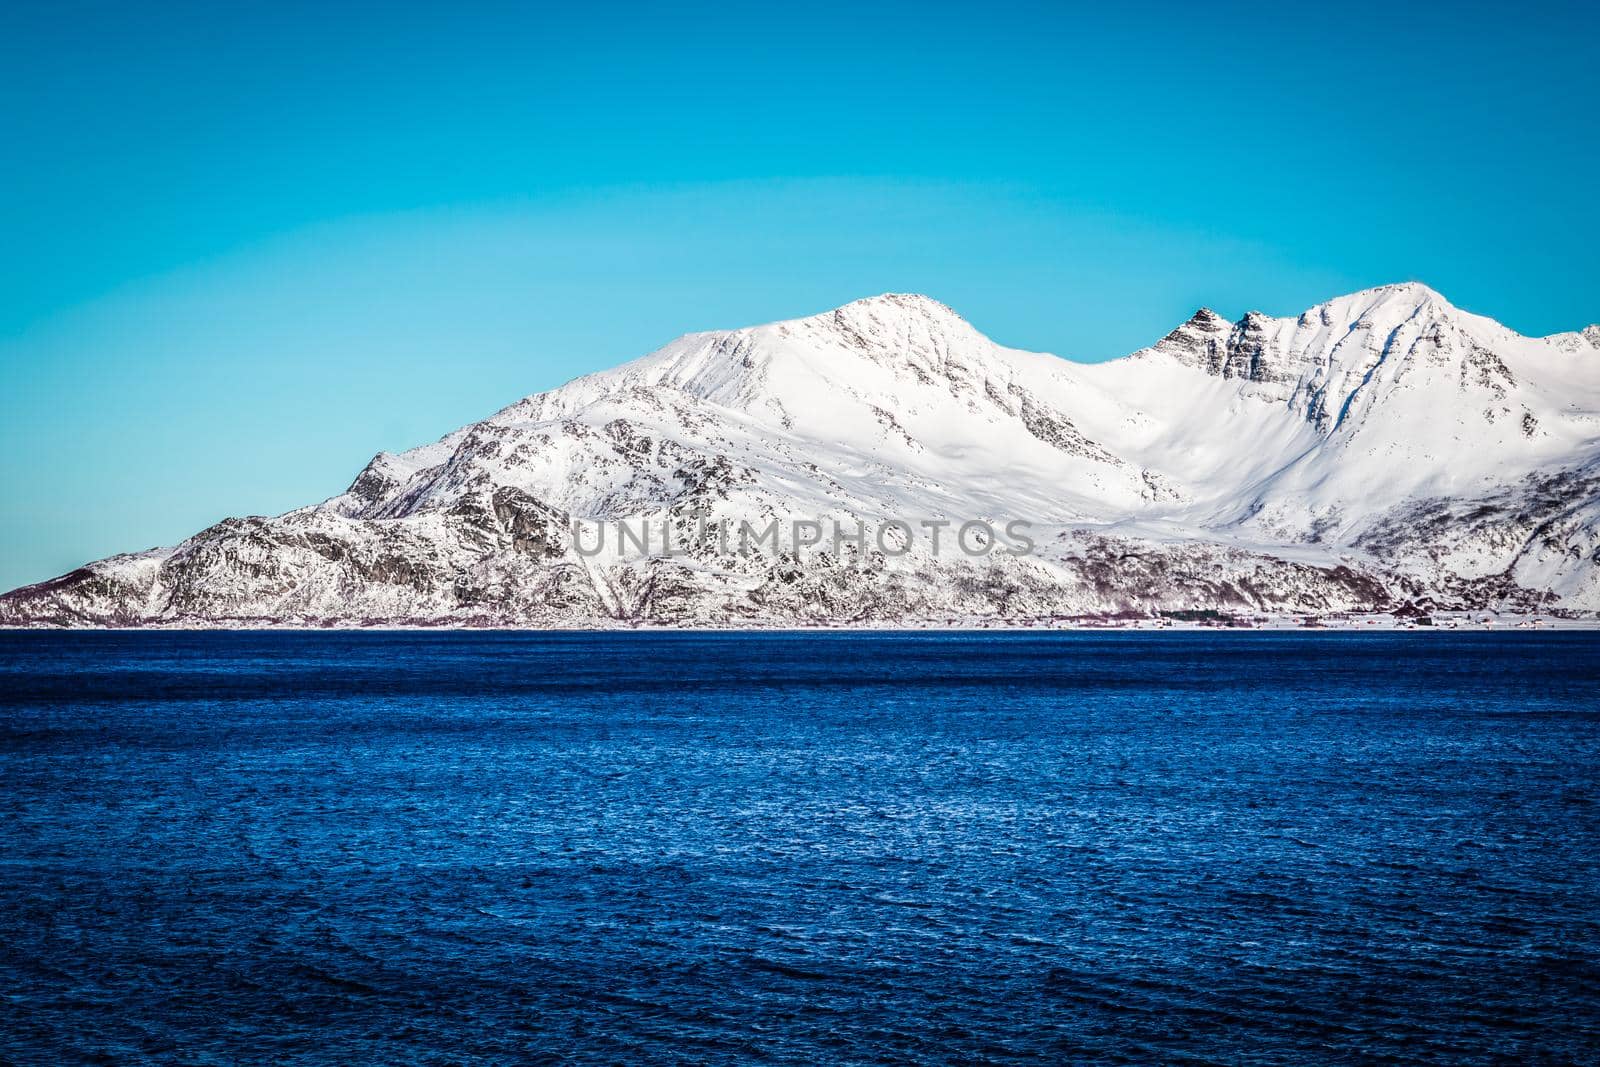 Snow Mountain with Fjord in foreground (Norway near Tromso) by bildgigant